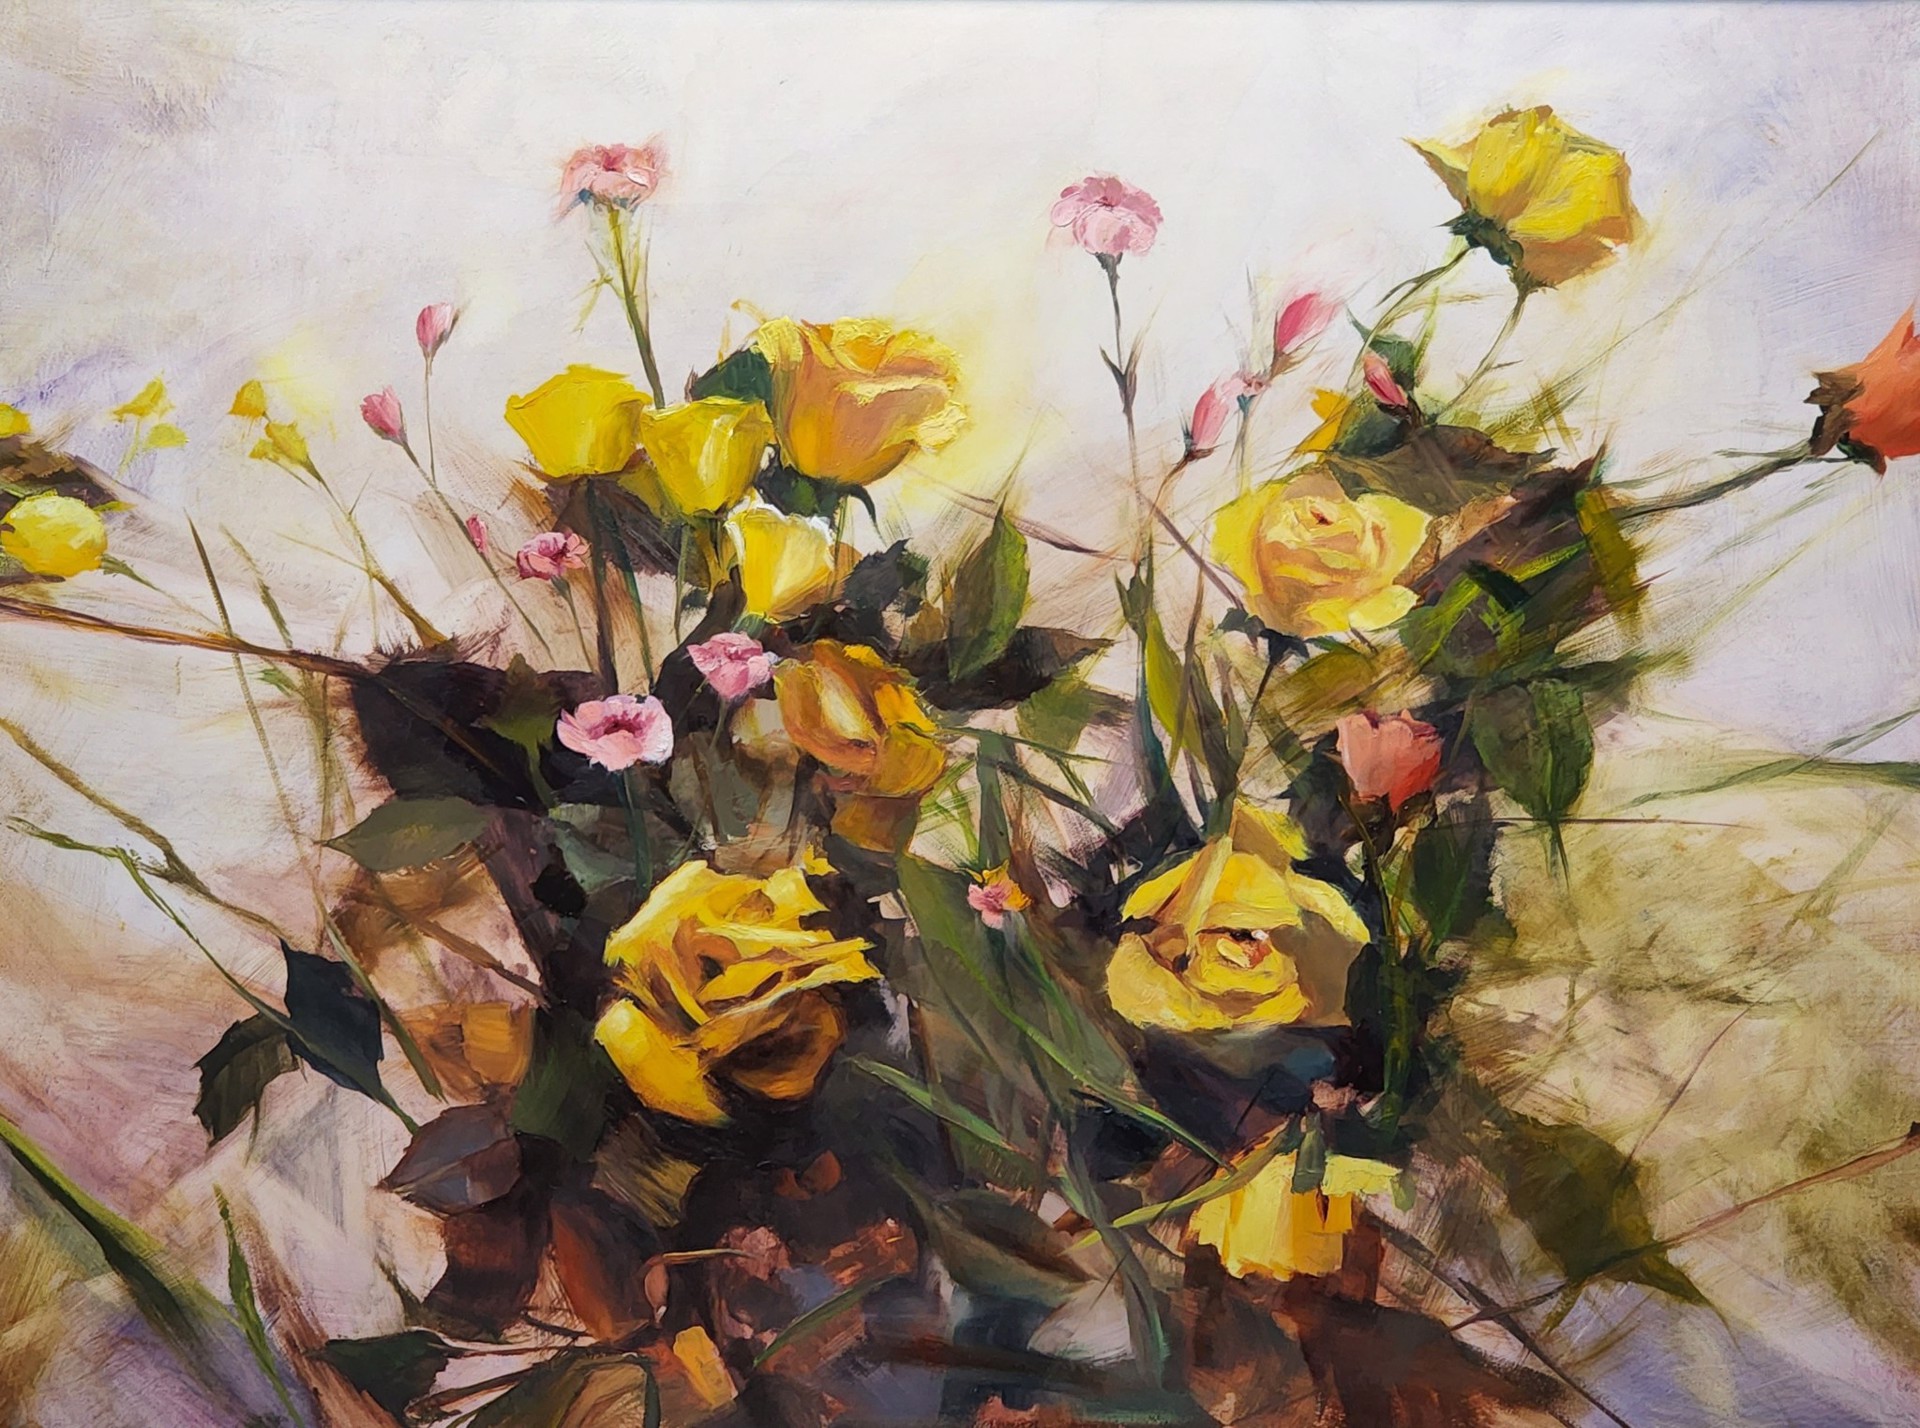 Yellow Flowers, A Study of Richard Schmid by Silvia Belviso